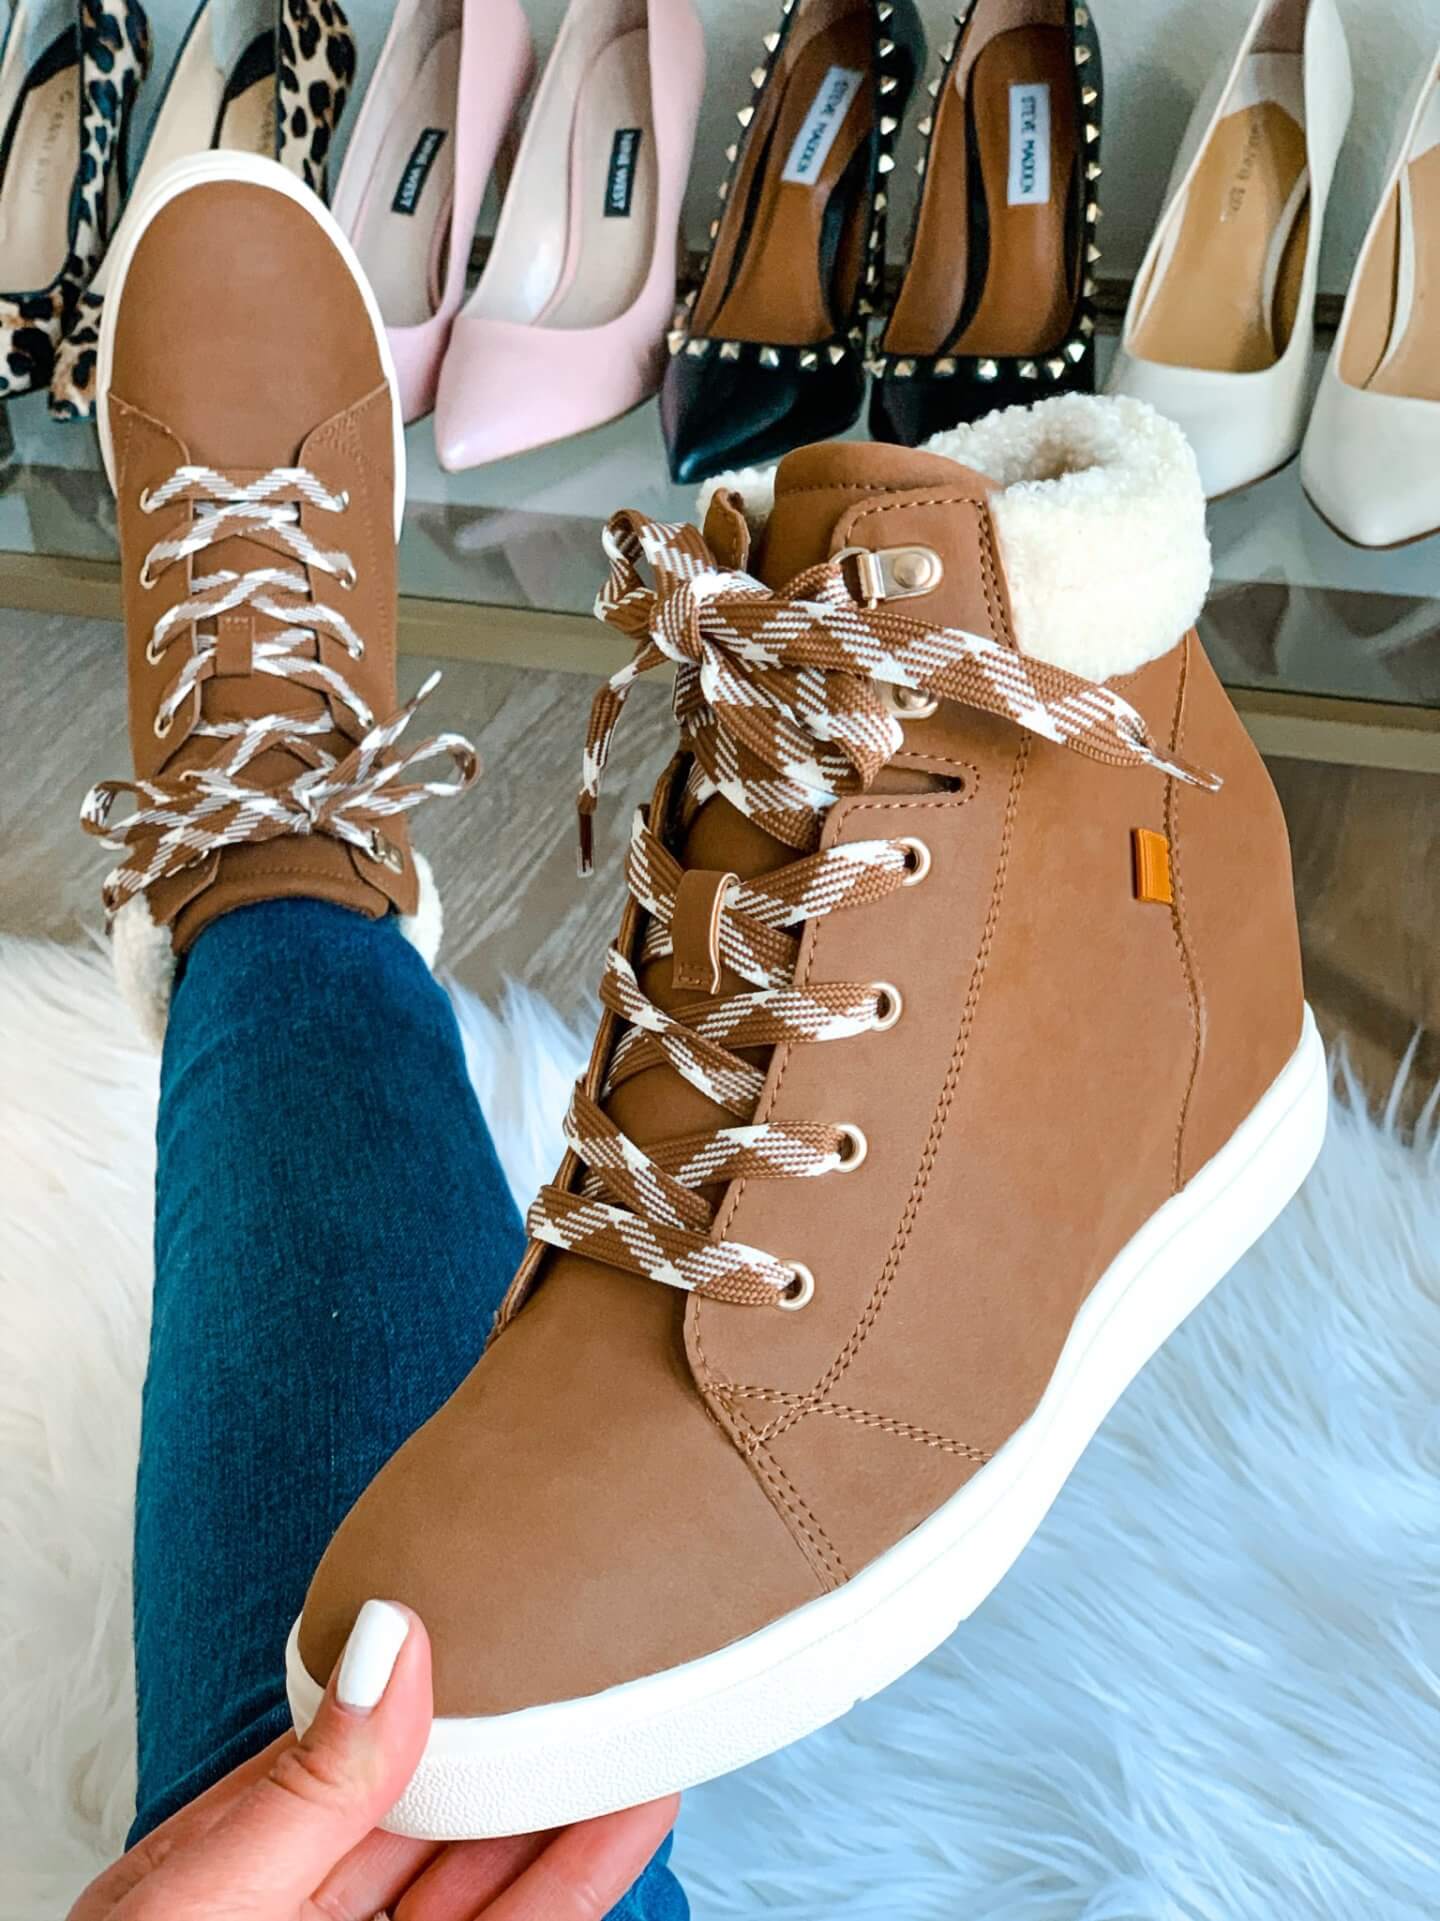 New Fall & Winter Shoe Try On + Giftcard Giveaway! - The Double Take Girls